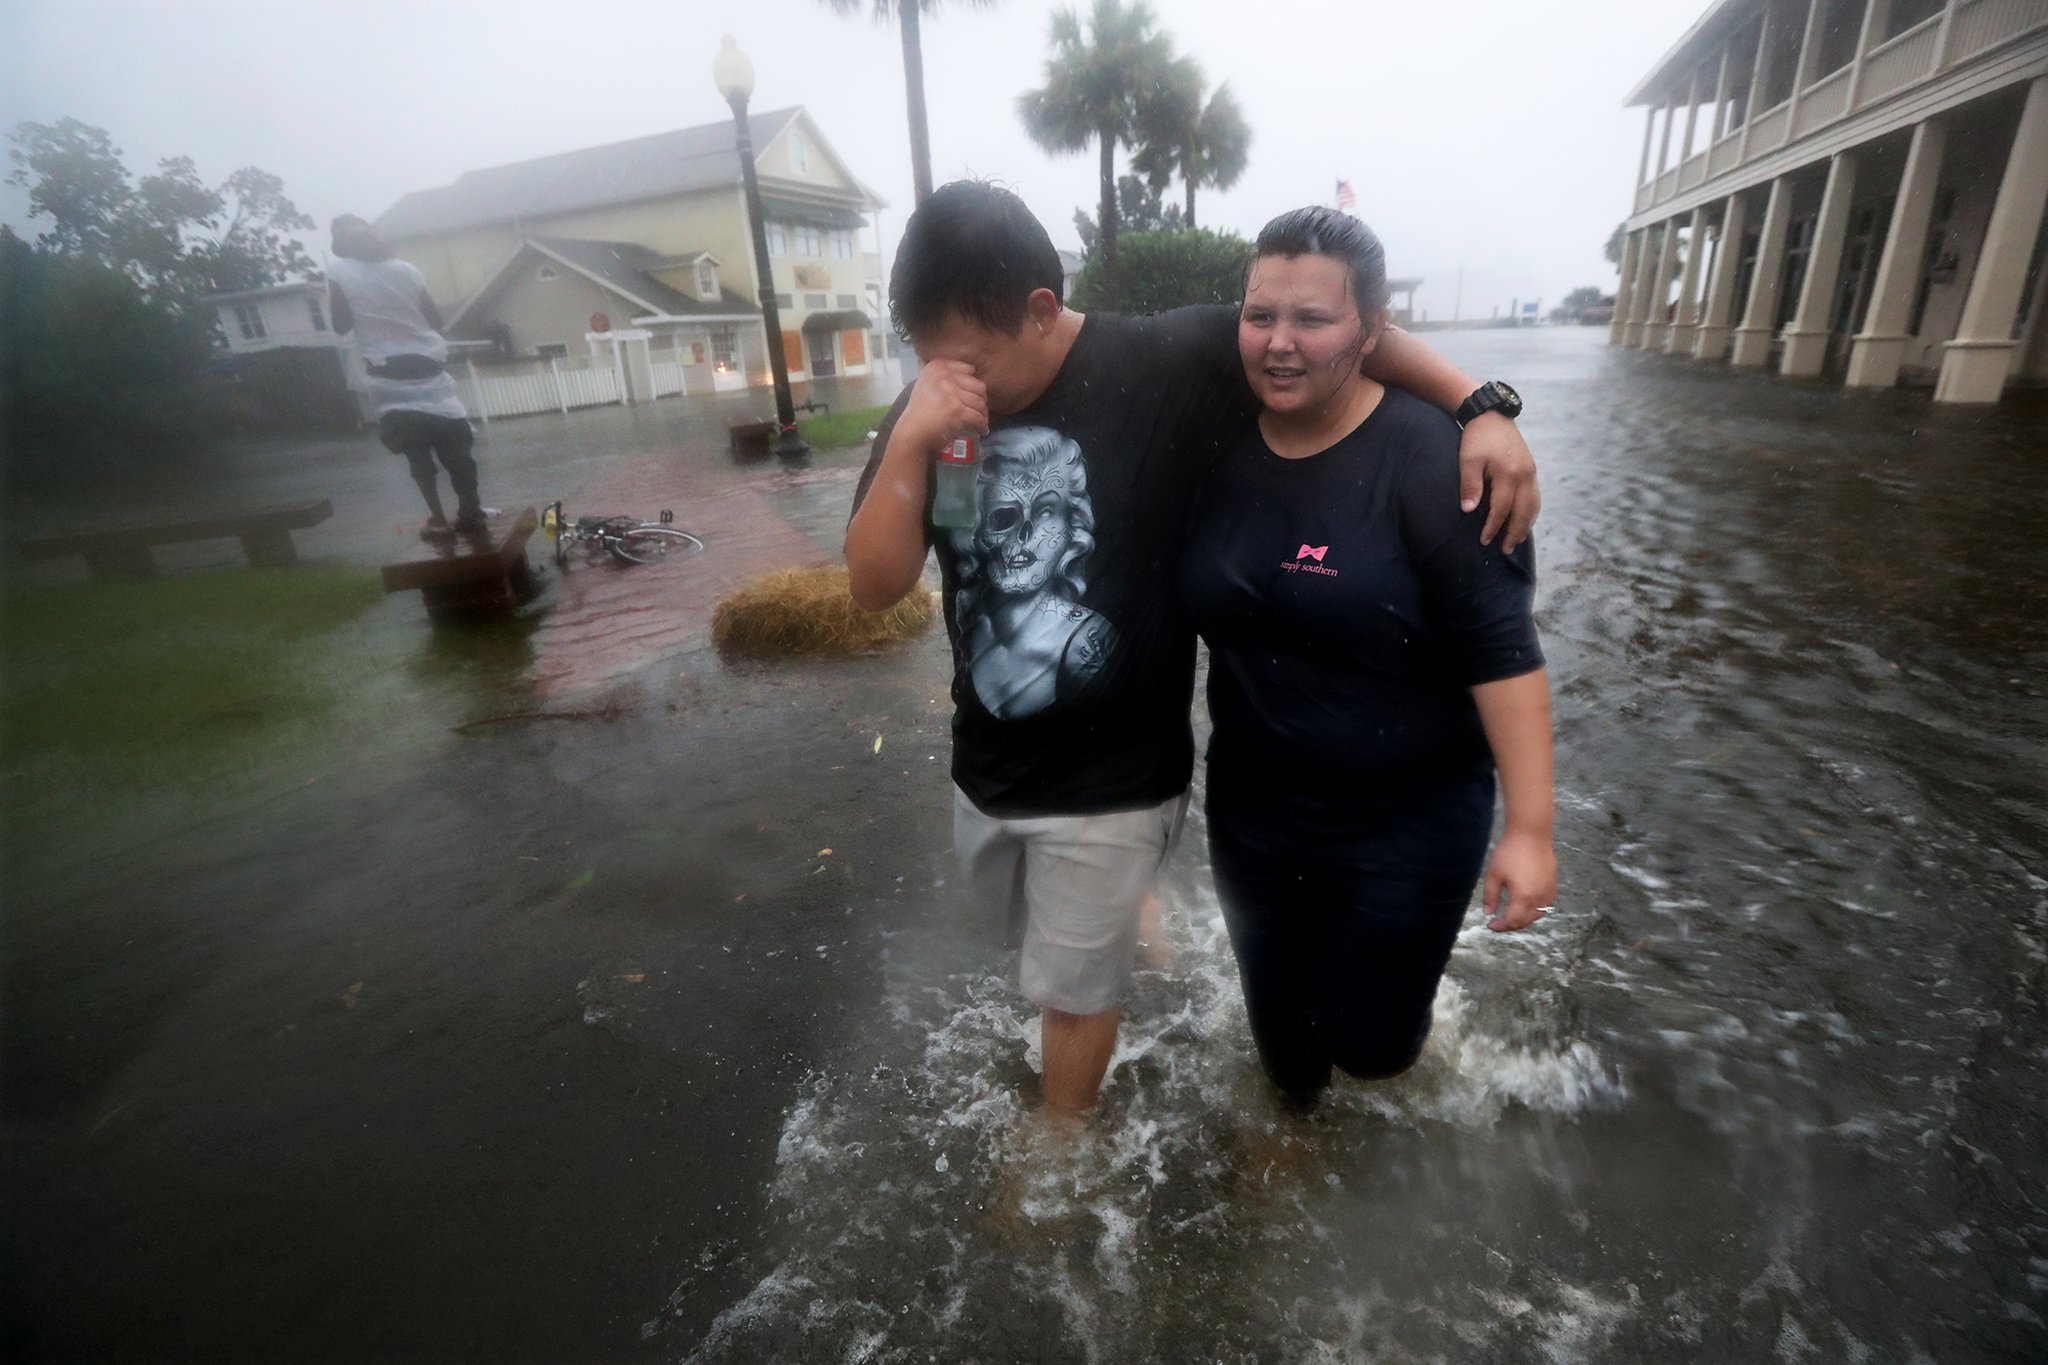 Michael and Tori Munton make their way through the flooded streets of downtown historic Saint Marys, Ga., as the storm surge from Hurricane Matthew hits on Friday, Oct. 14th  7, 2016. Curtis Compton /ccompton@ajc.com